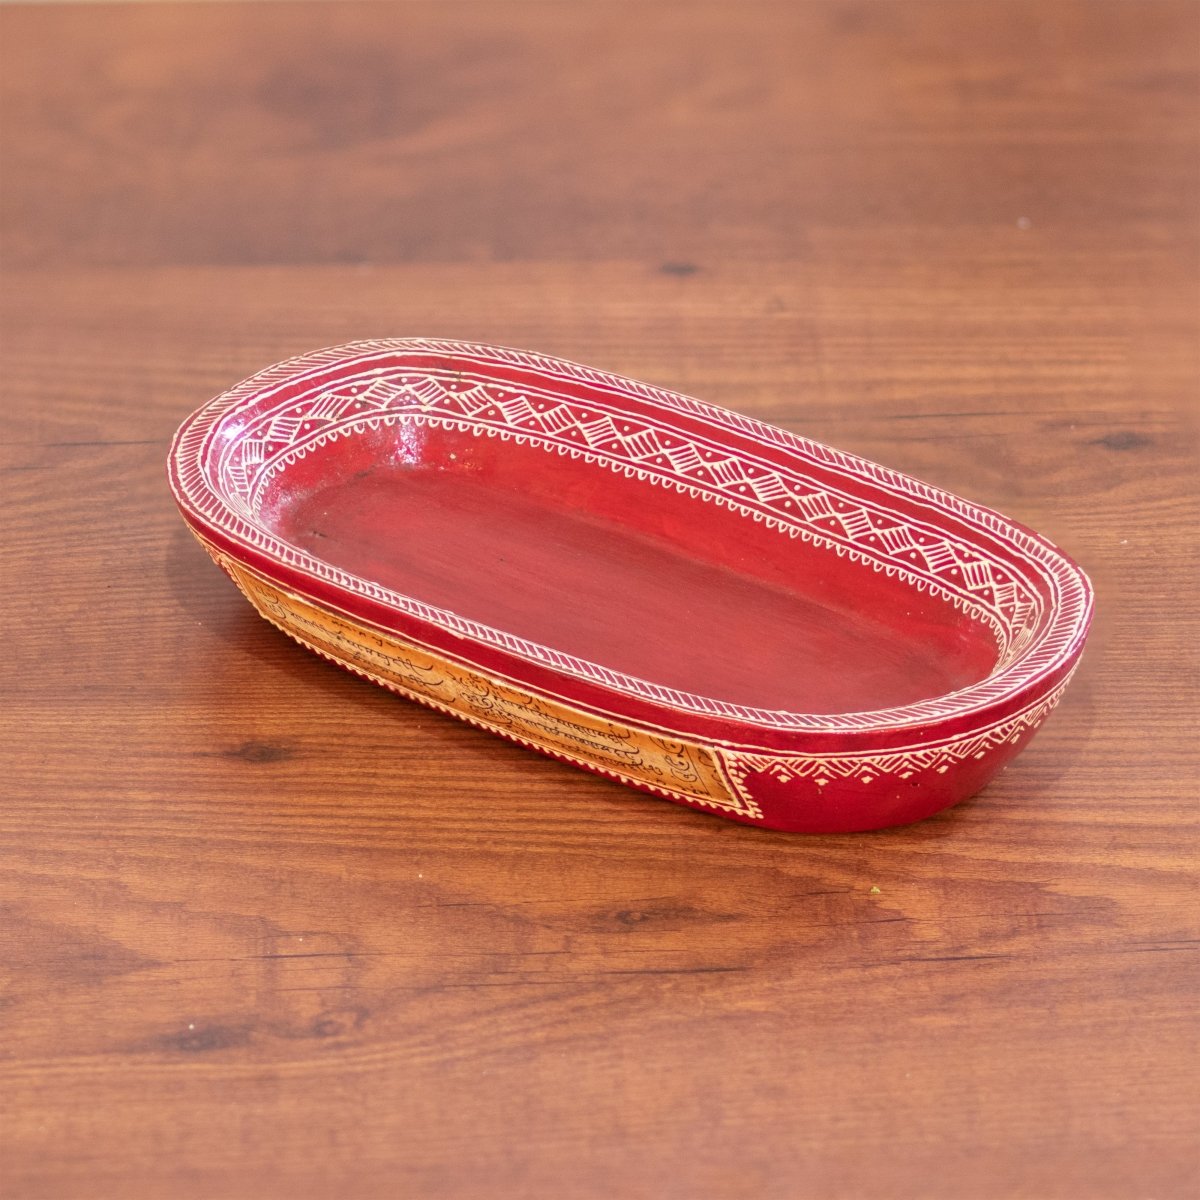 Kezevel Wooden Decorative Tray - Oval Red White Handcrafted Natural Mango Wood Small Tray for Decor, Storage Tray Puja Tray